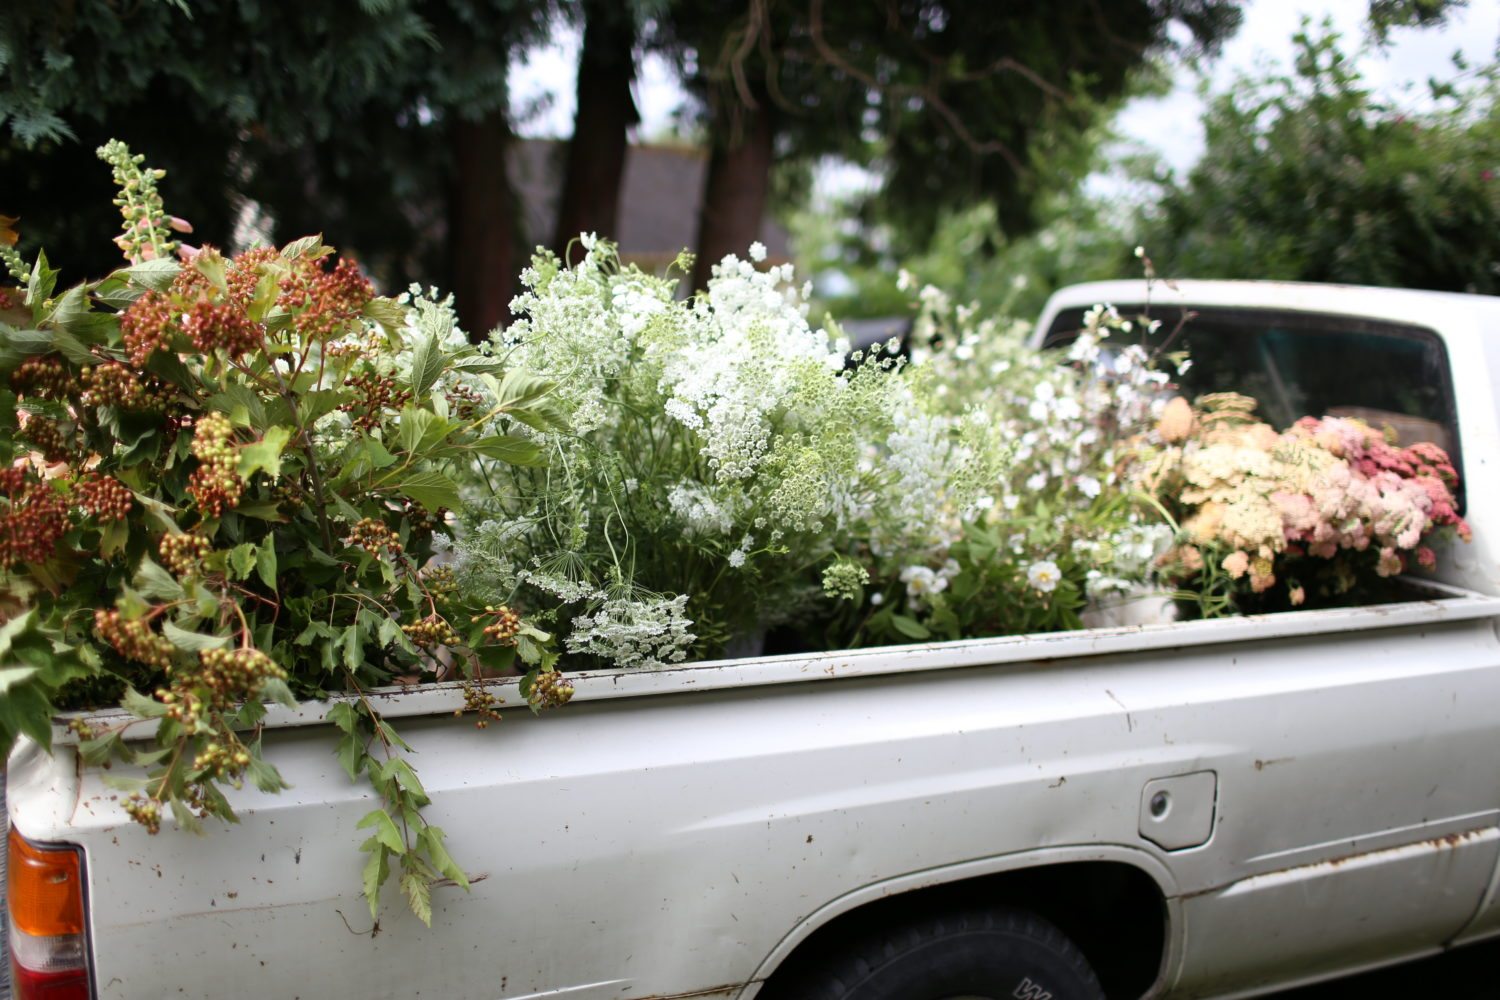 A pickup truck filled with flowers